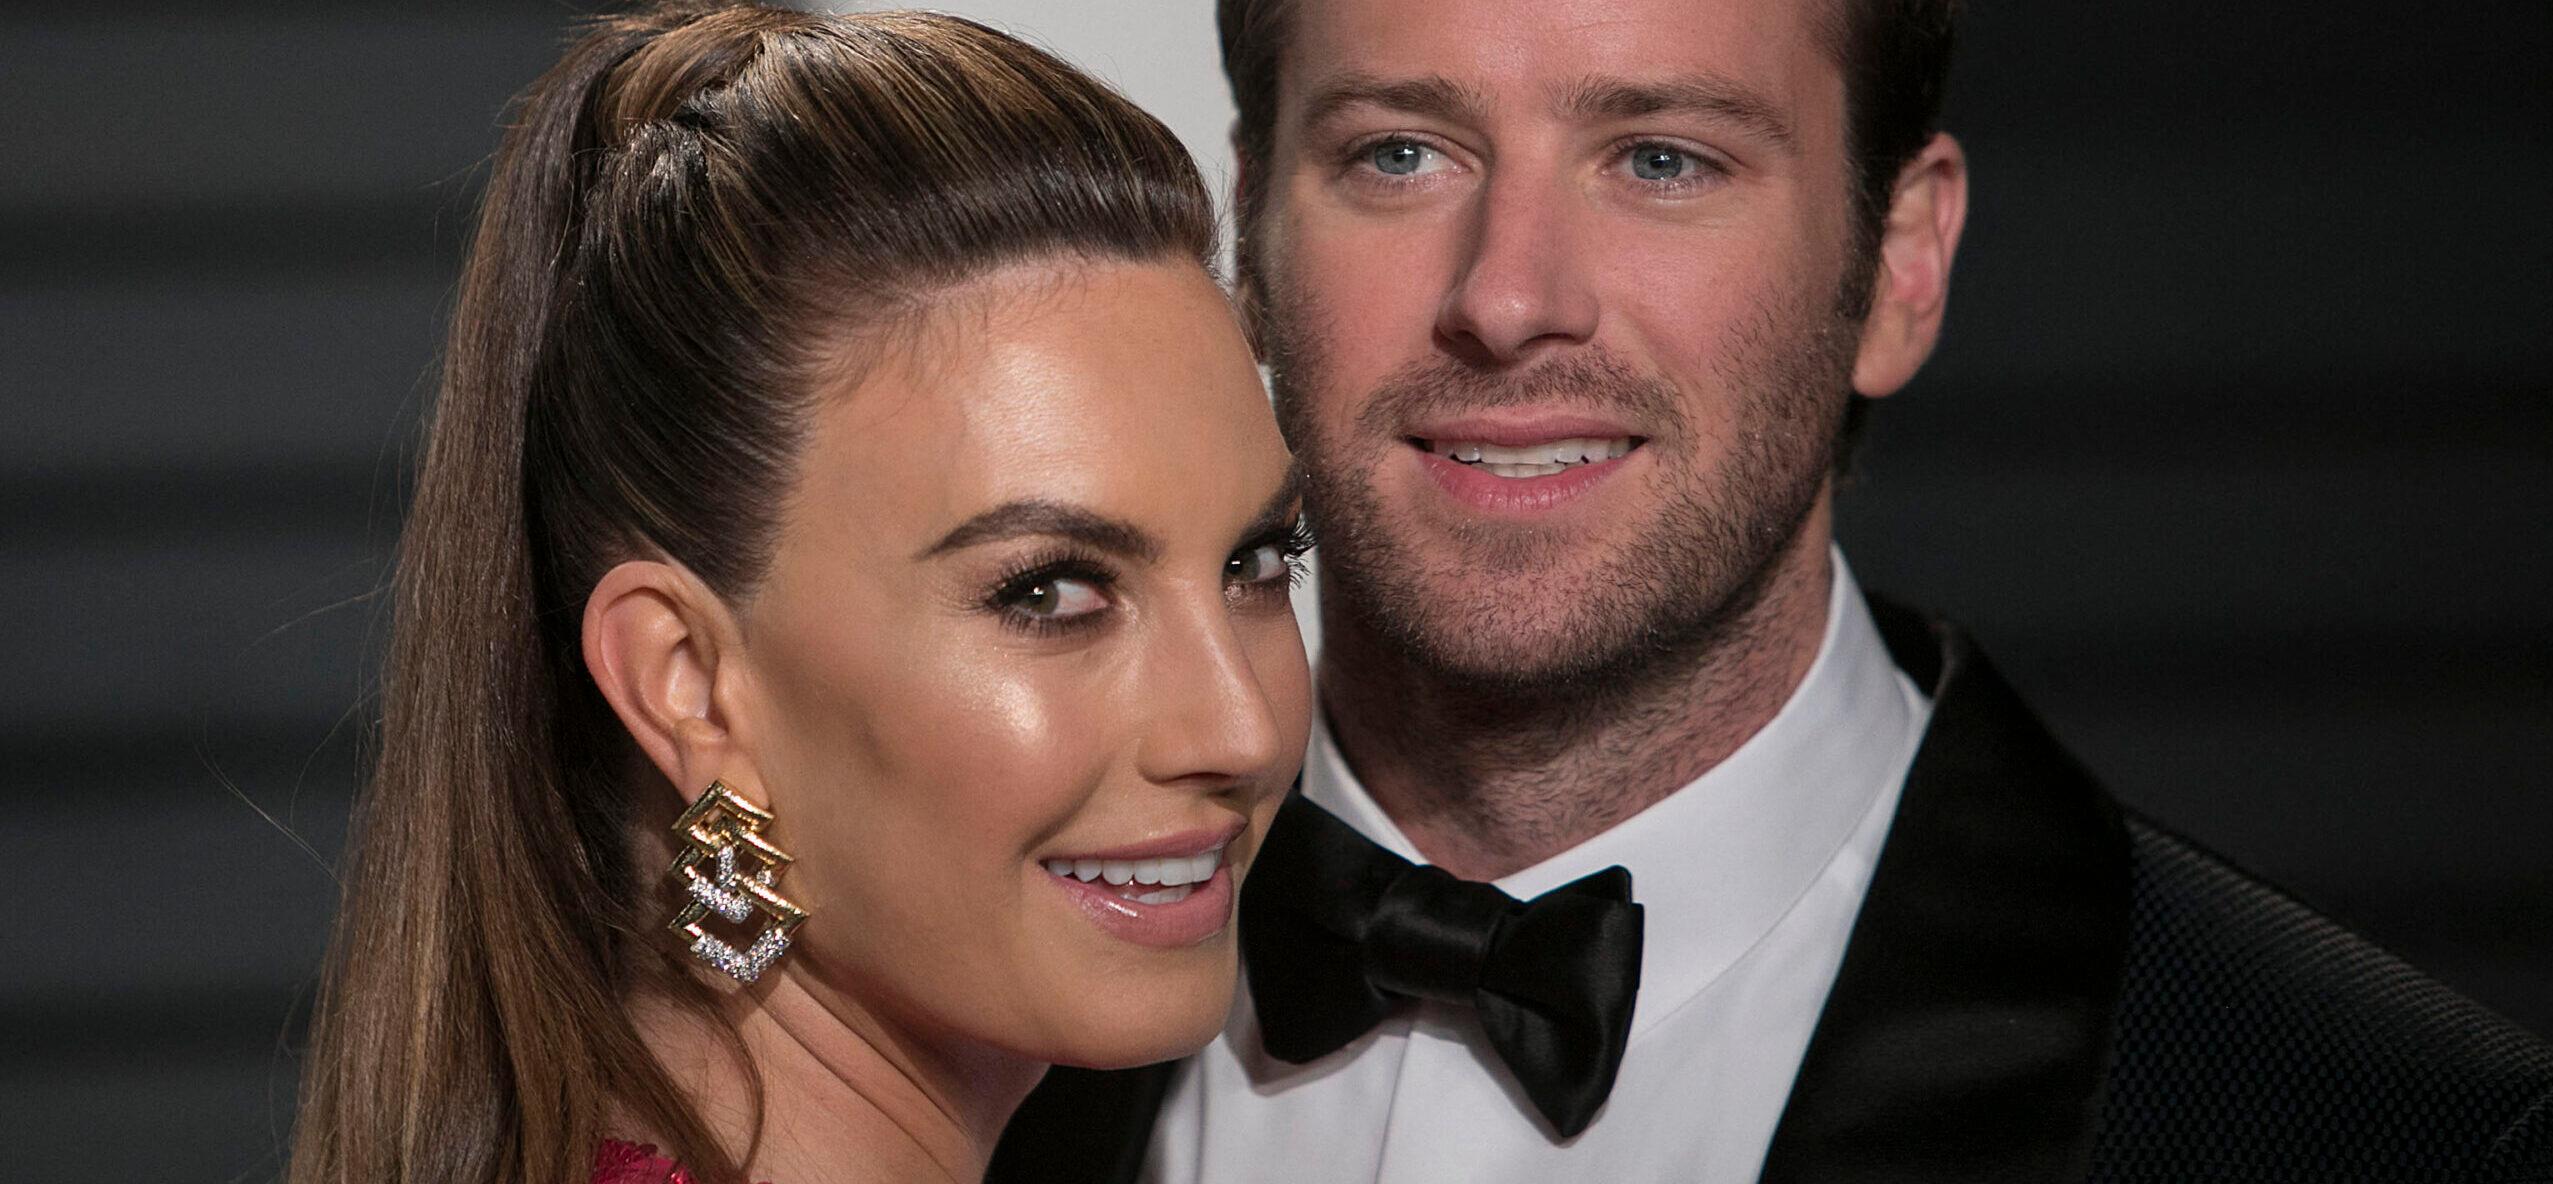 Armie Hammer and Elizabeth Chambers To Share Joint Custody Of Children In Divorce Settlement